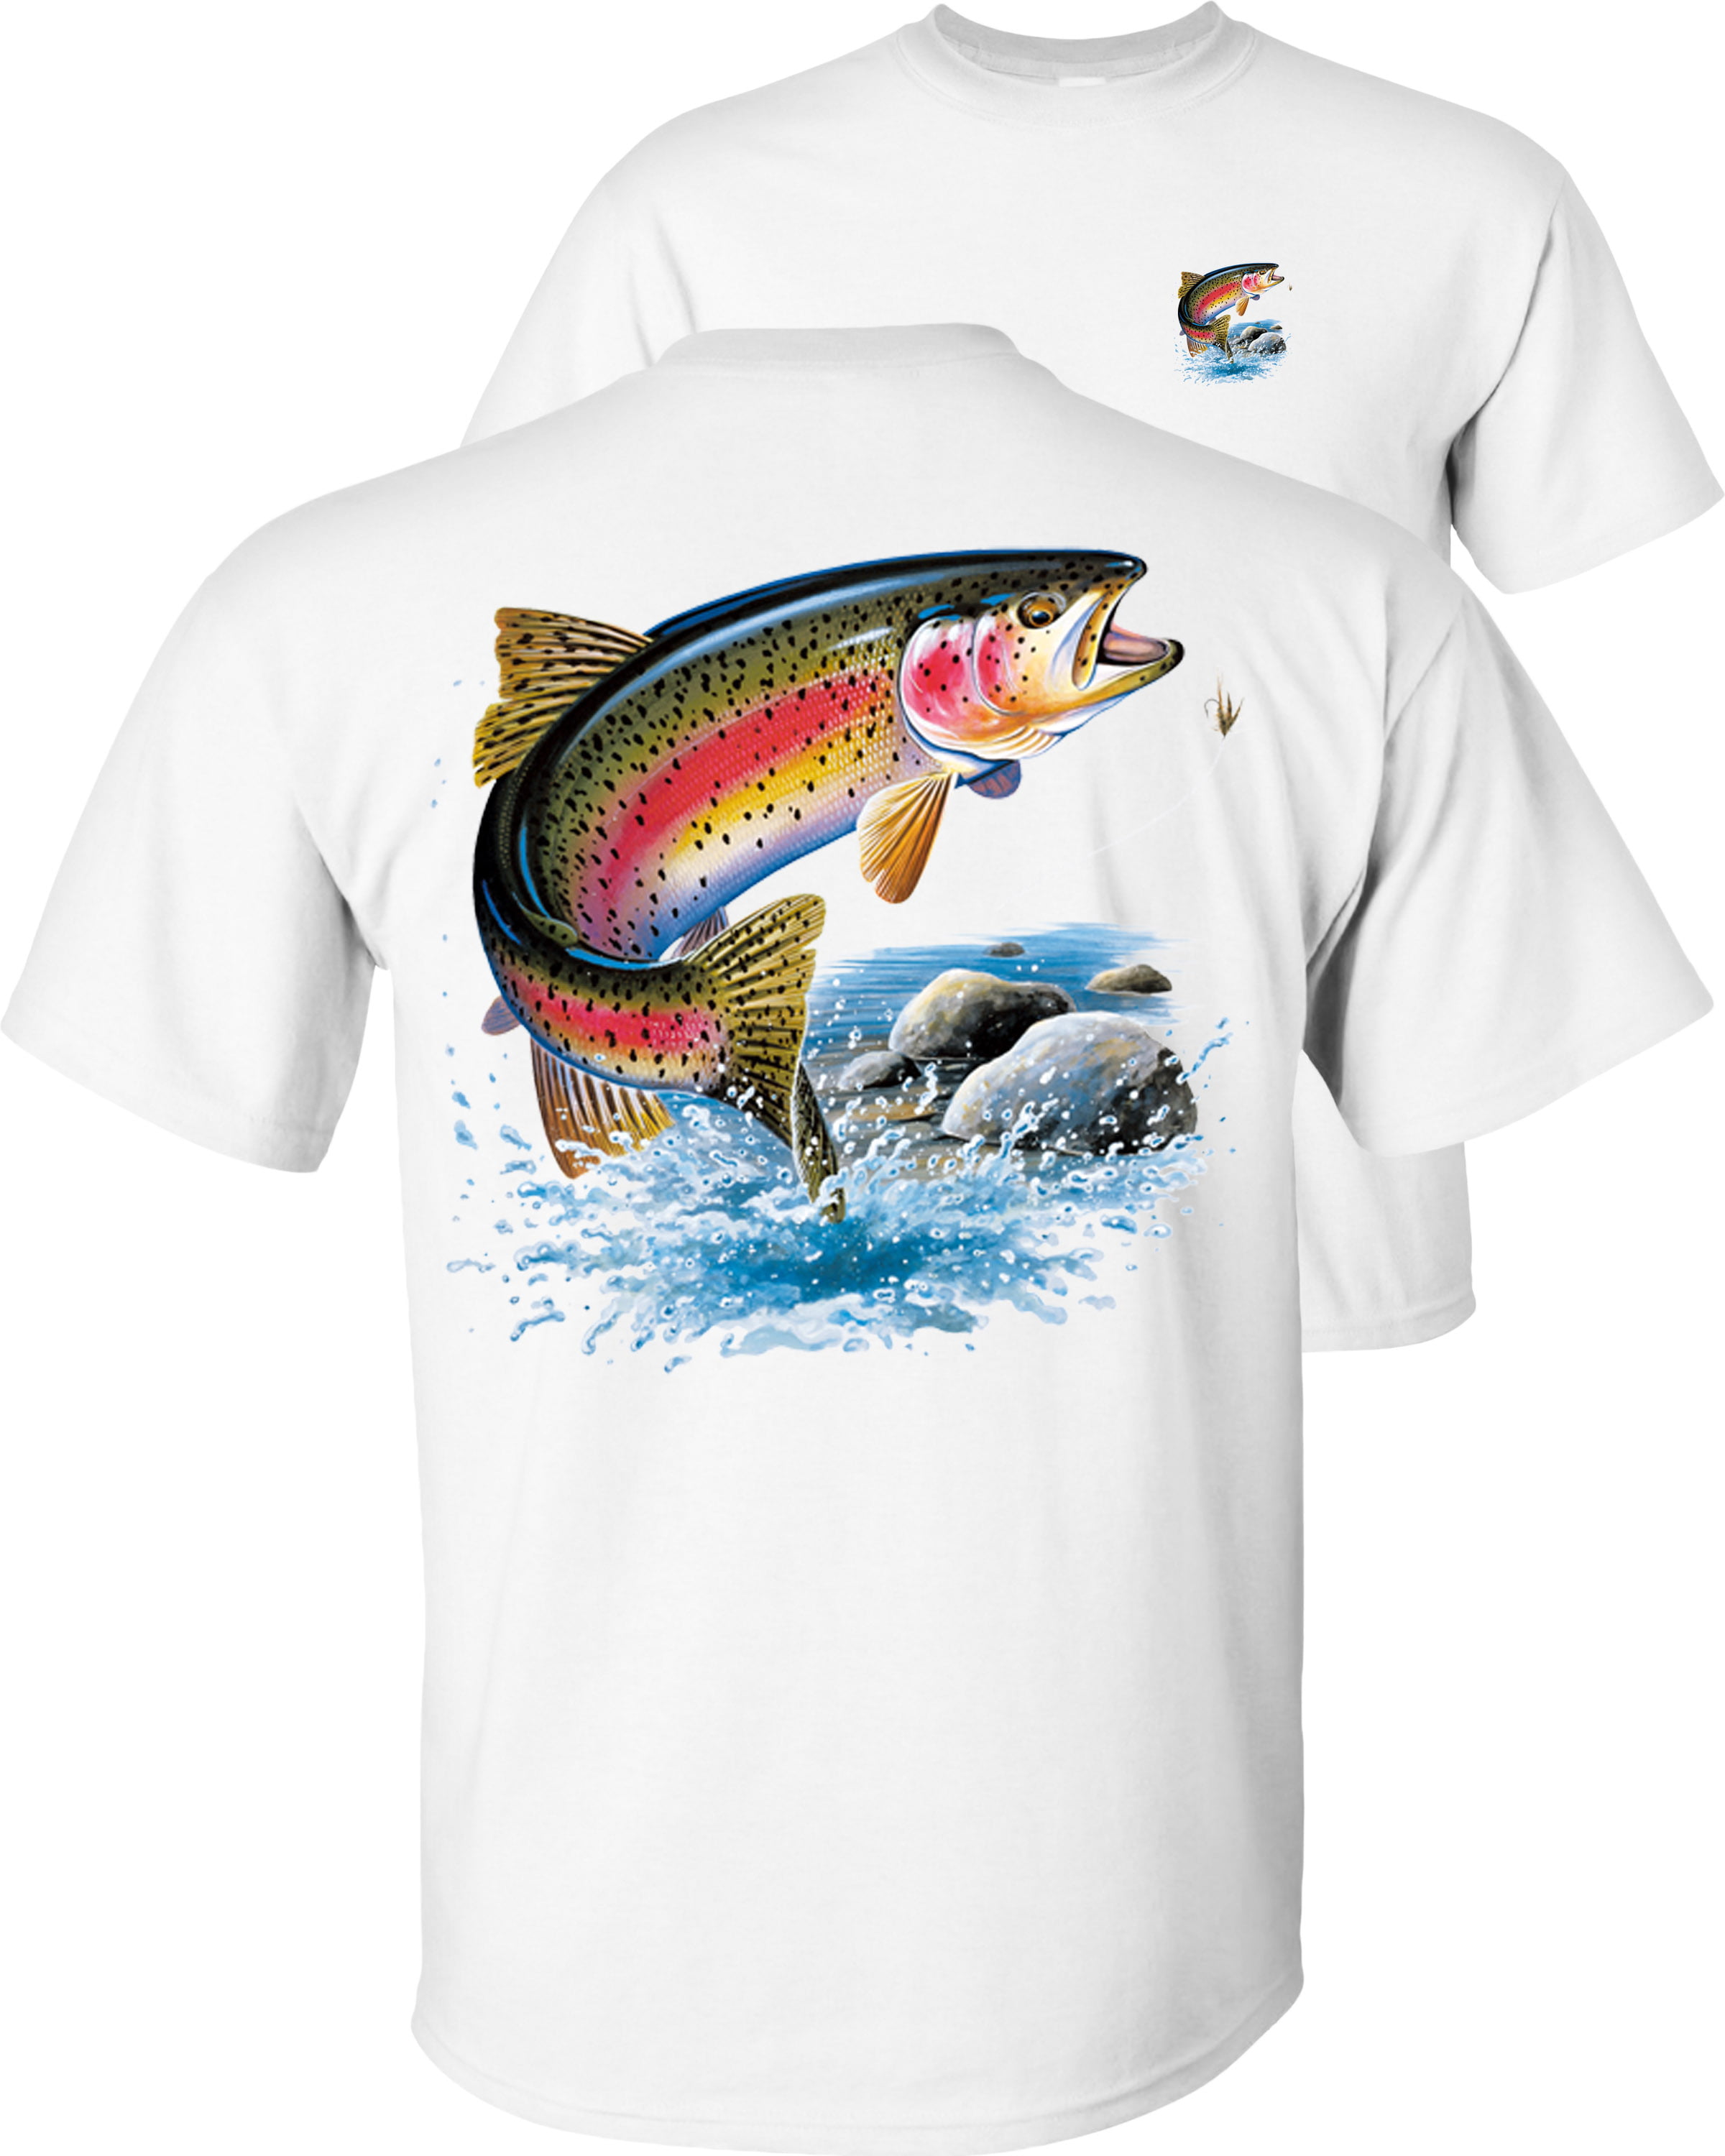 Fair Game Rainbow Trout T-Shirt Fly Fishing Fisherman-White-XL, Adult unisex